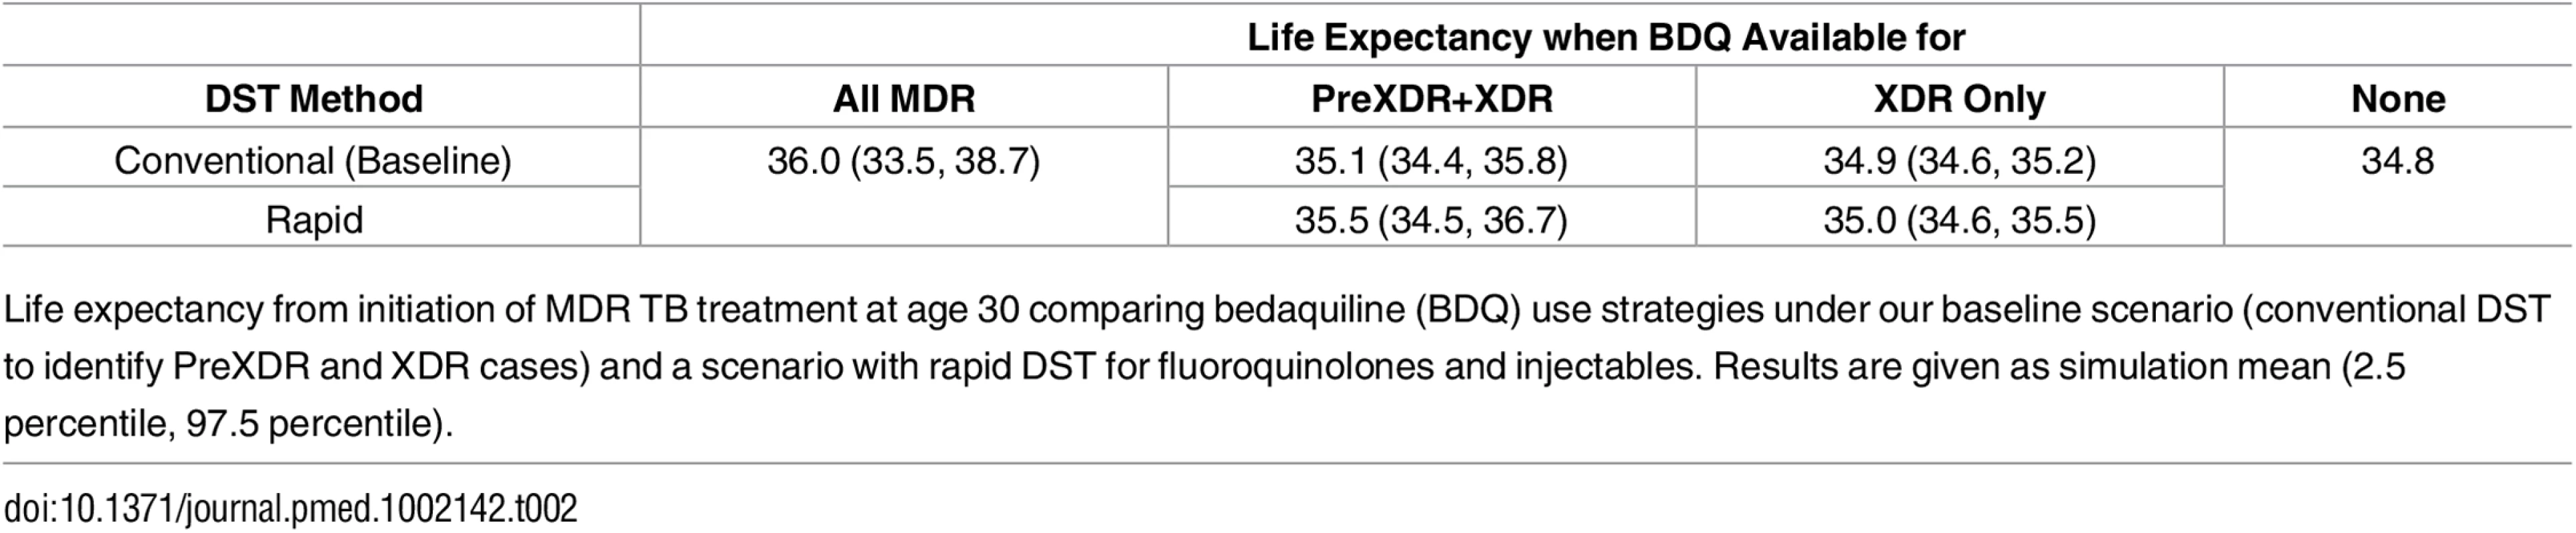 Life expectancy by DST method.